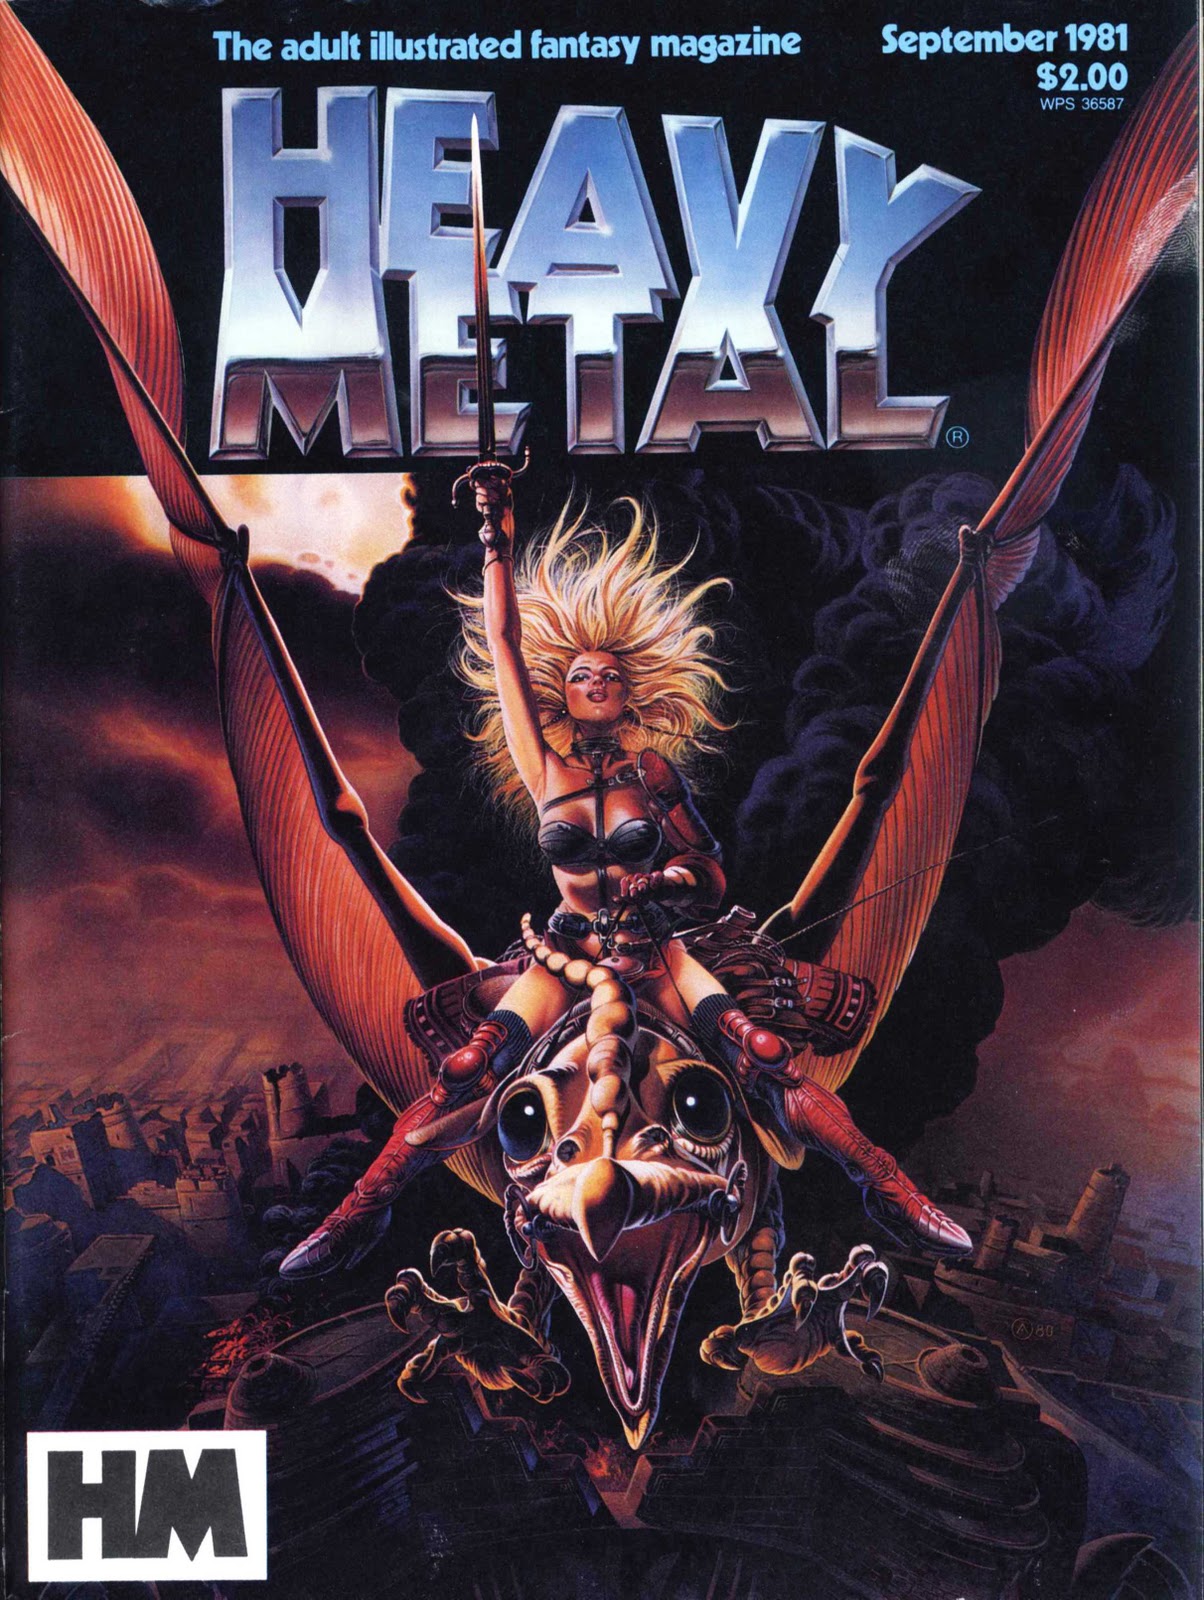 Heavy Metal Magazine Covers From The 1980s HD Walls Find